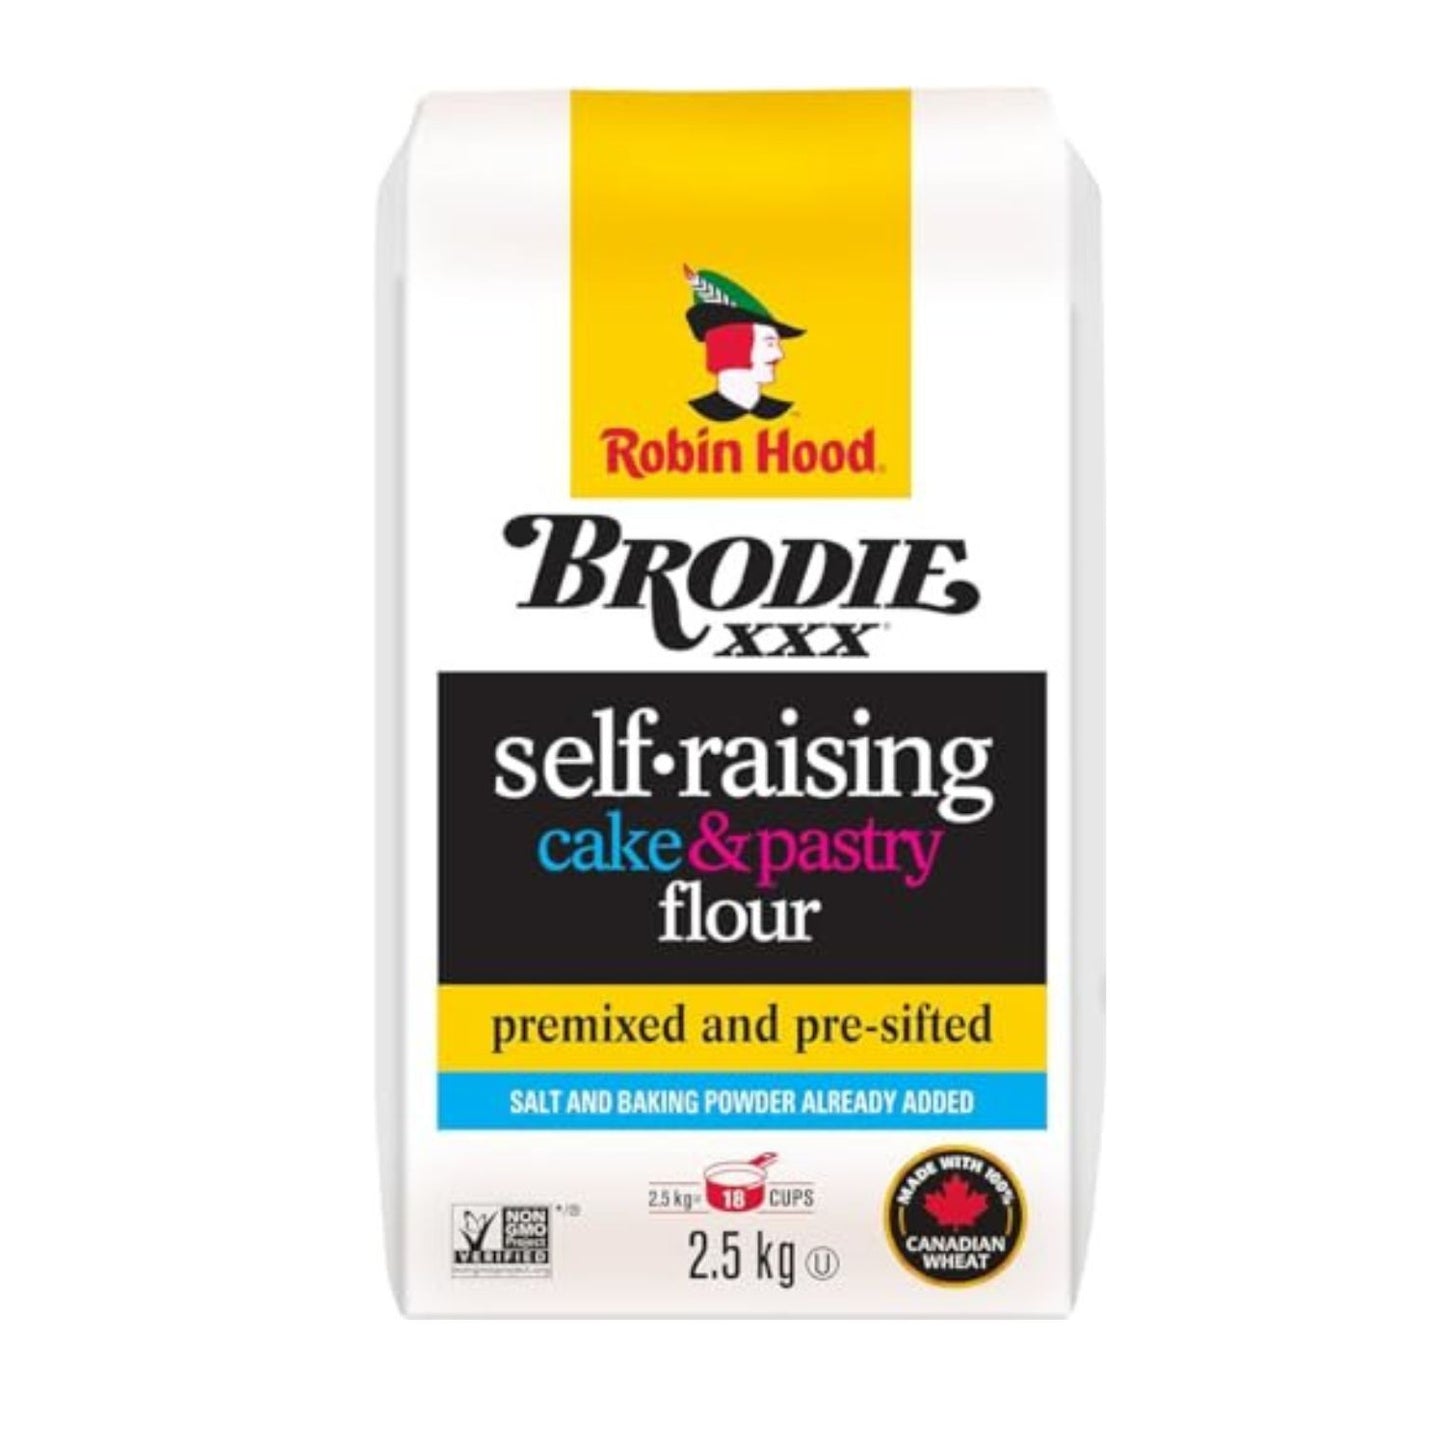 Robin Hood Brodie Self Rising Cake & Pastry Flour, 2.5kg/88.2 oz (Shipped from Canada)